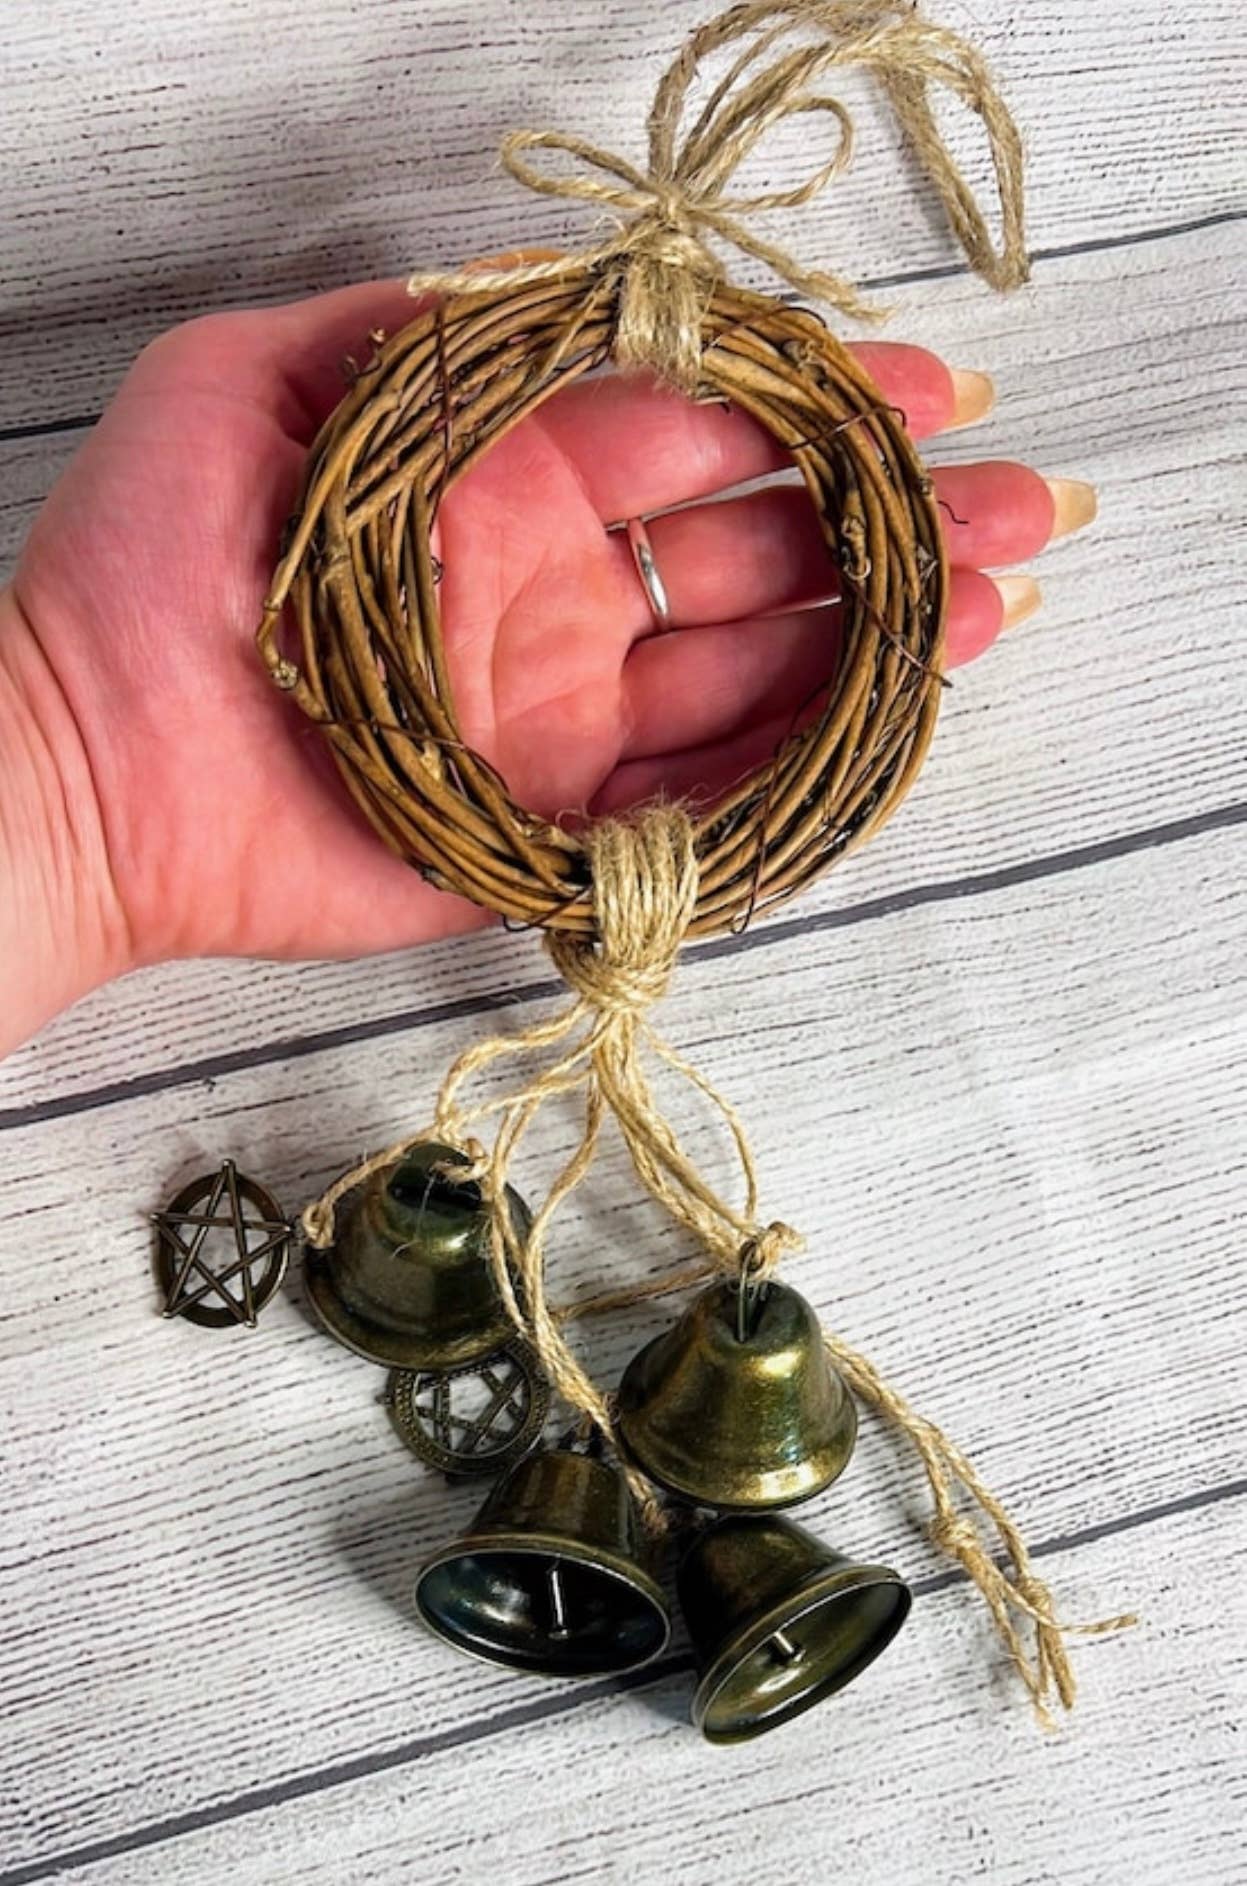 Witch Bells for home decoration and protection